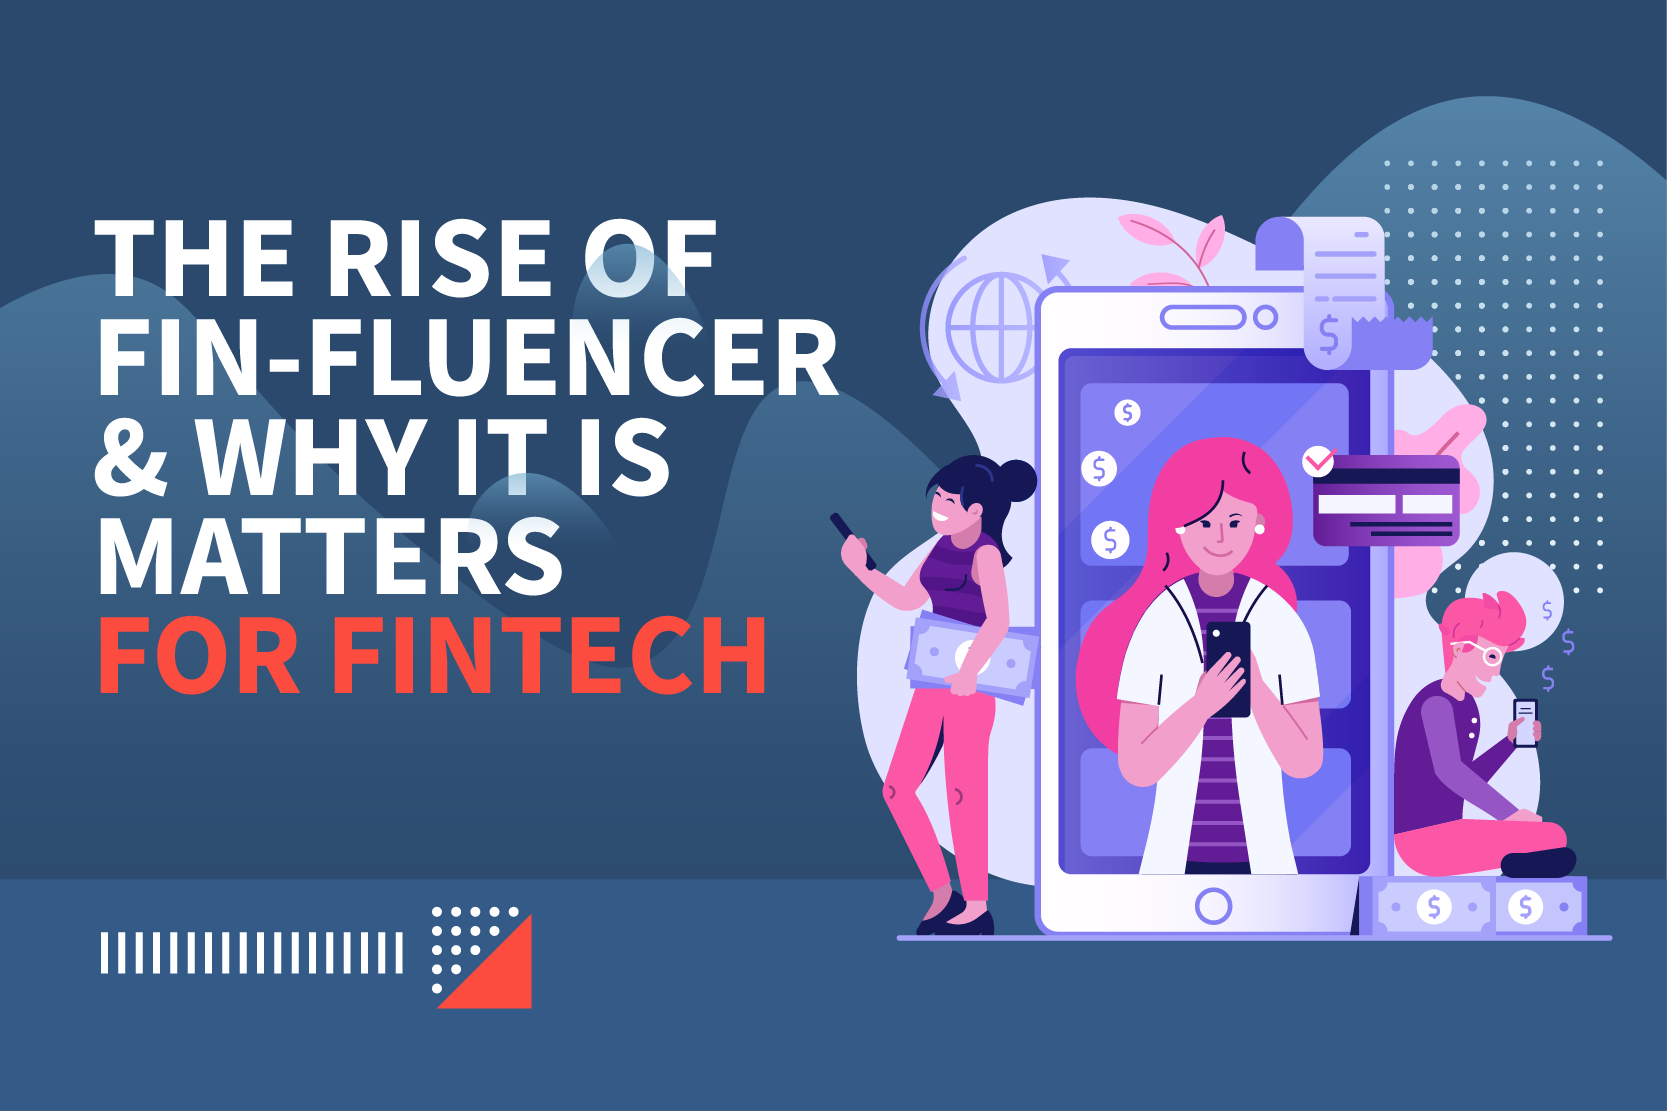 <div>The Rise of Fin-Fluencer & Why It is Matters for Fintech</div>